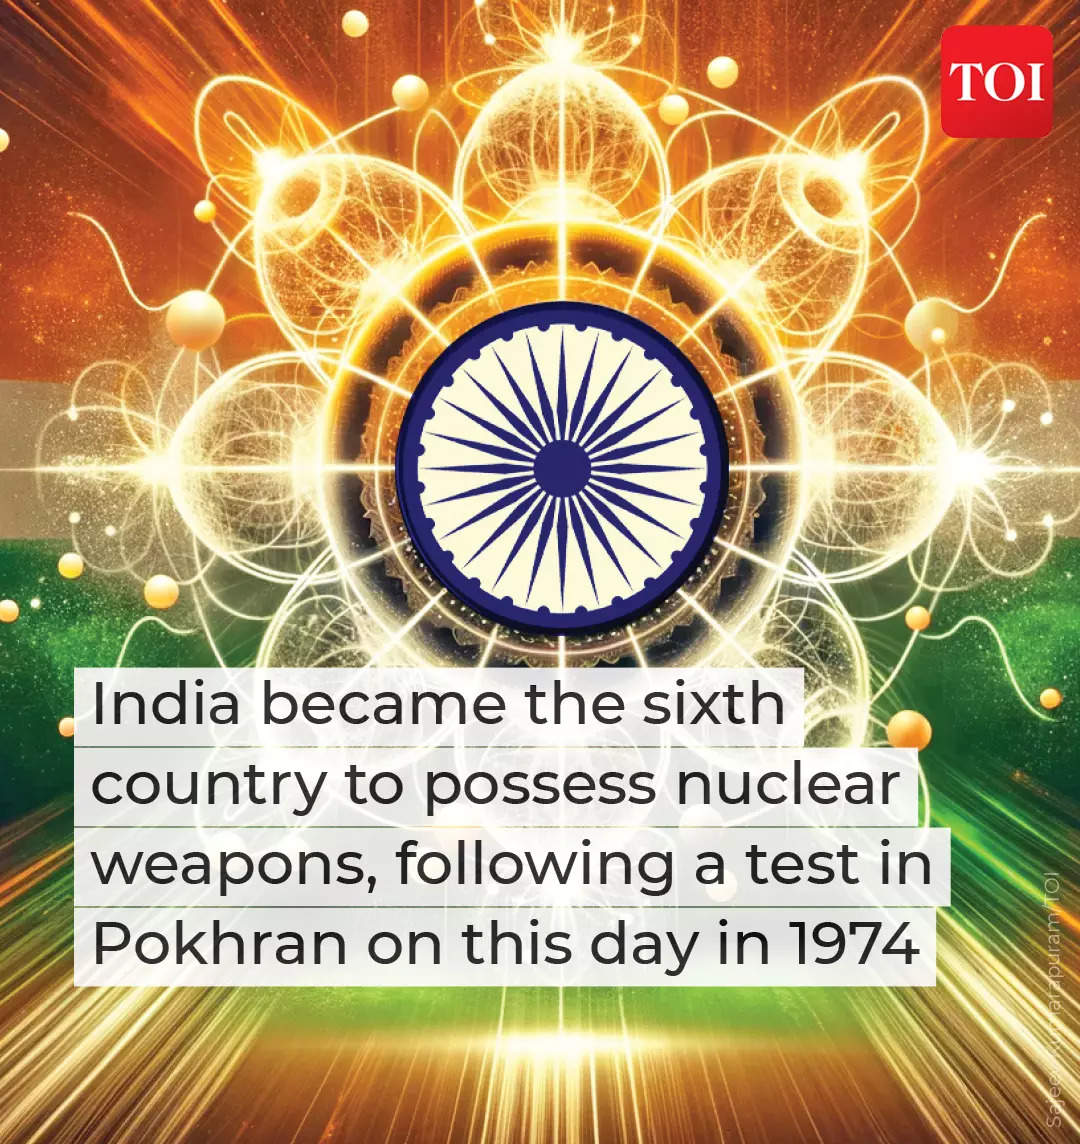 7. When India went nuclear